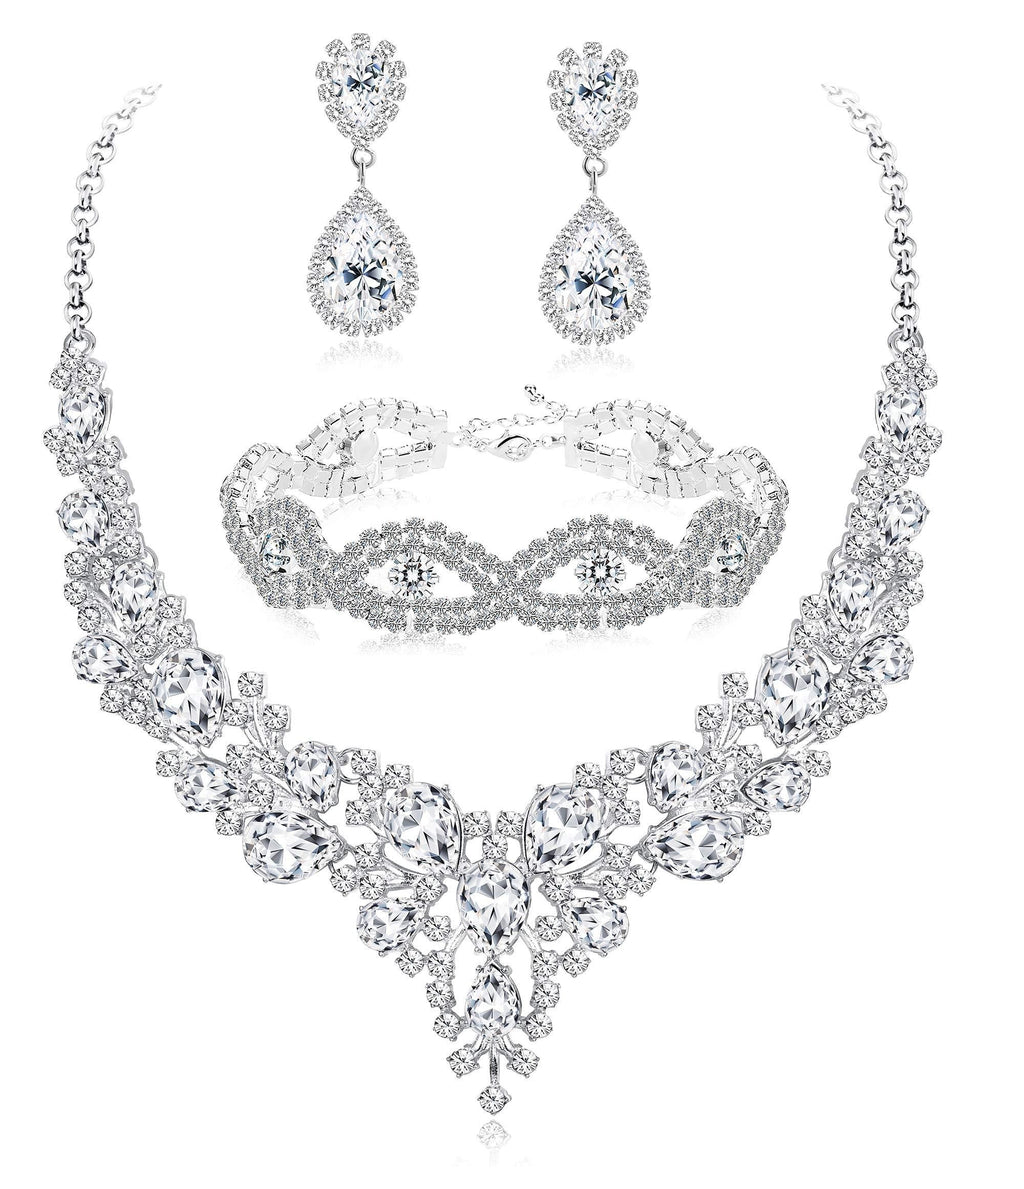 [Australia] - LOLIAS Bridal Austrian Crystal Necklace Link Bracelet Statement Necklace Dangle Earrings Jewelry Set Gifts fit with Wedding Dress A:White A 